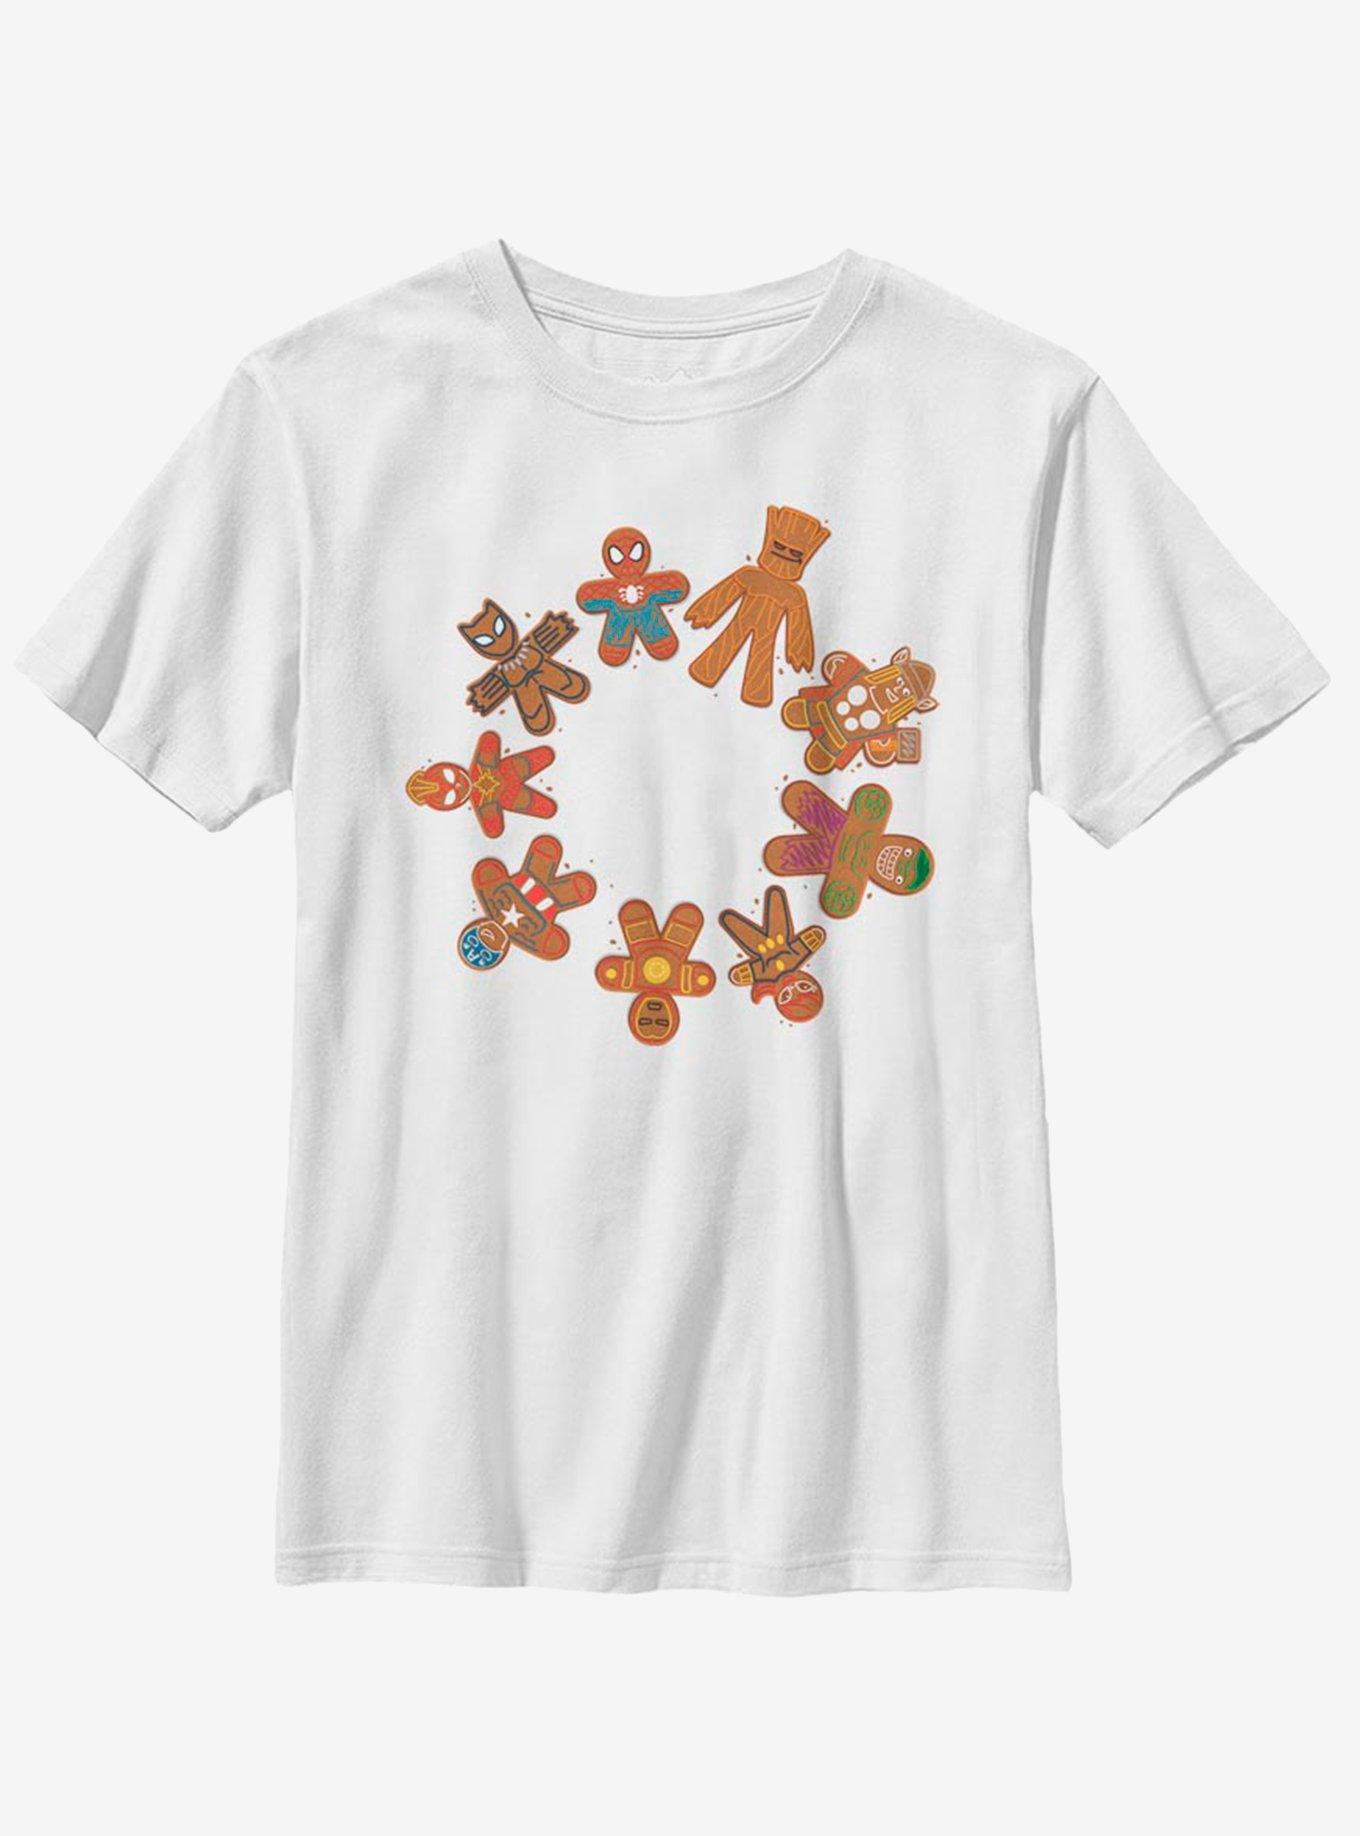 Marvel Avengers Cookie Circle Youth T-Shirt, WHITE, hi-res